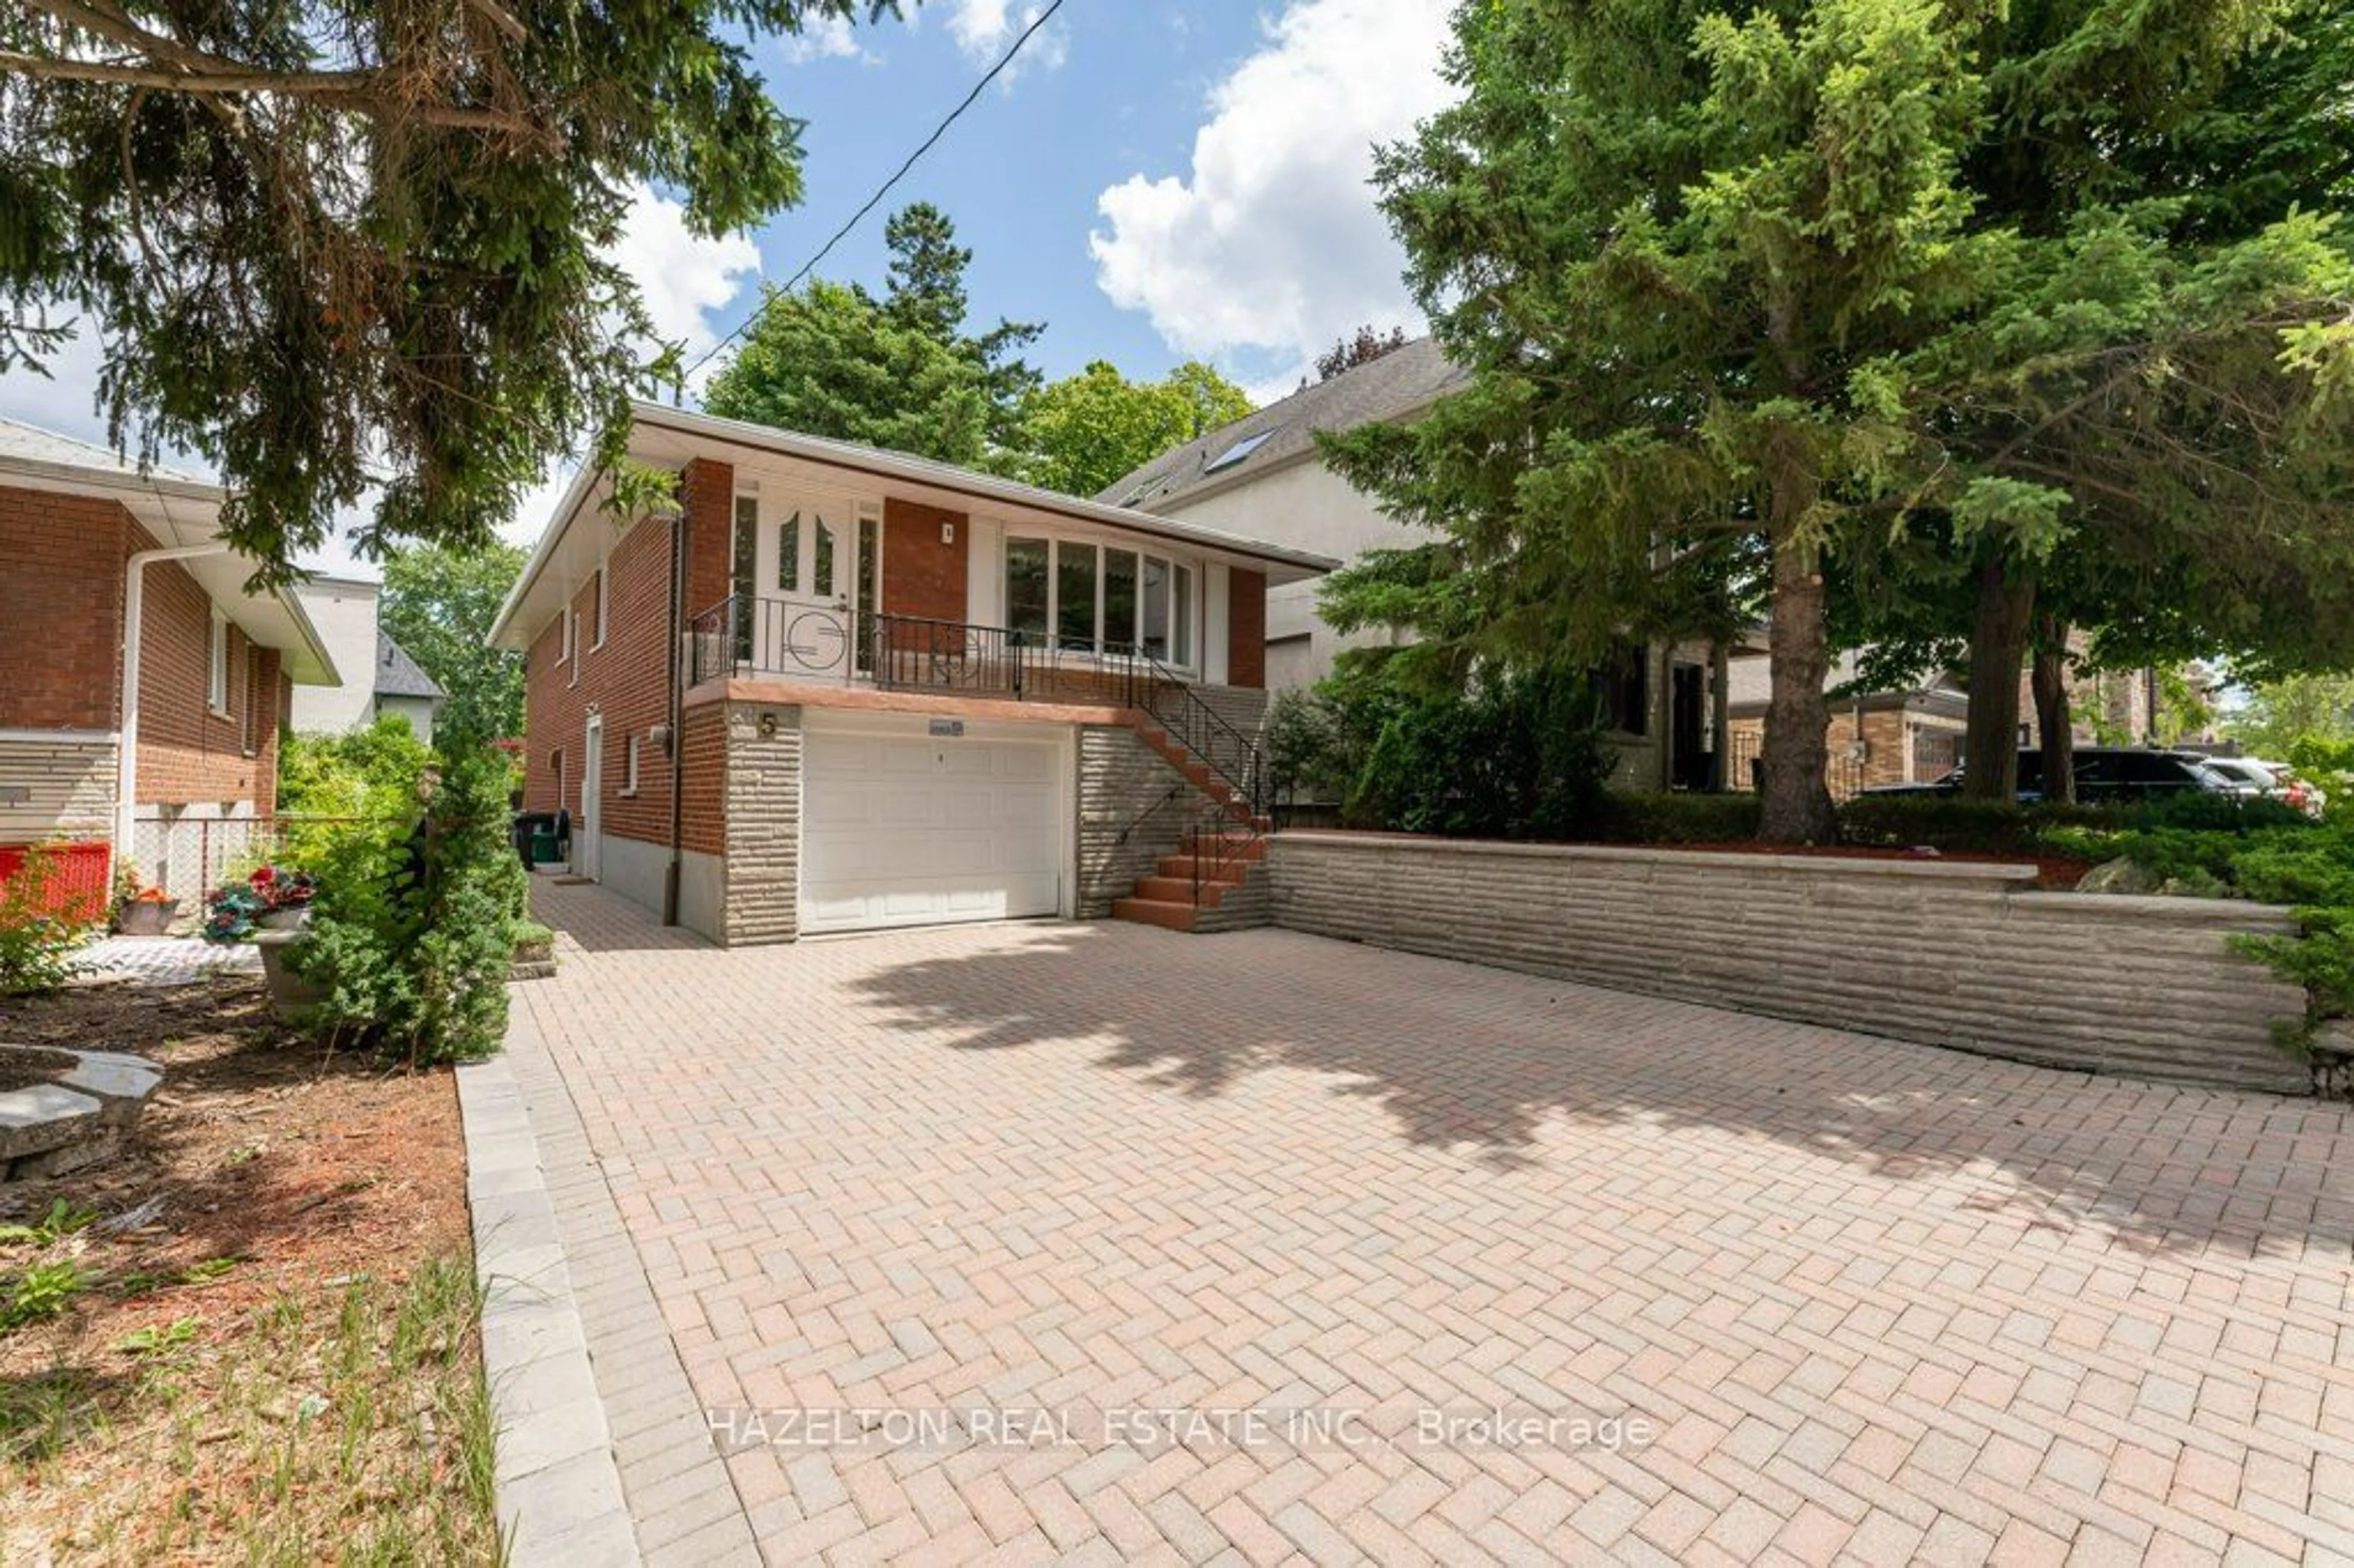 Home with brick exterior material for 5 Walford Rd, Toronto Ontario M8X 2N9